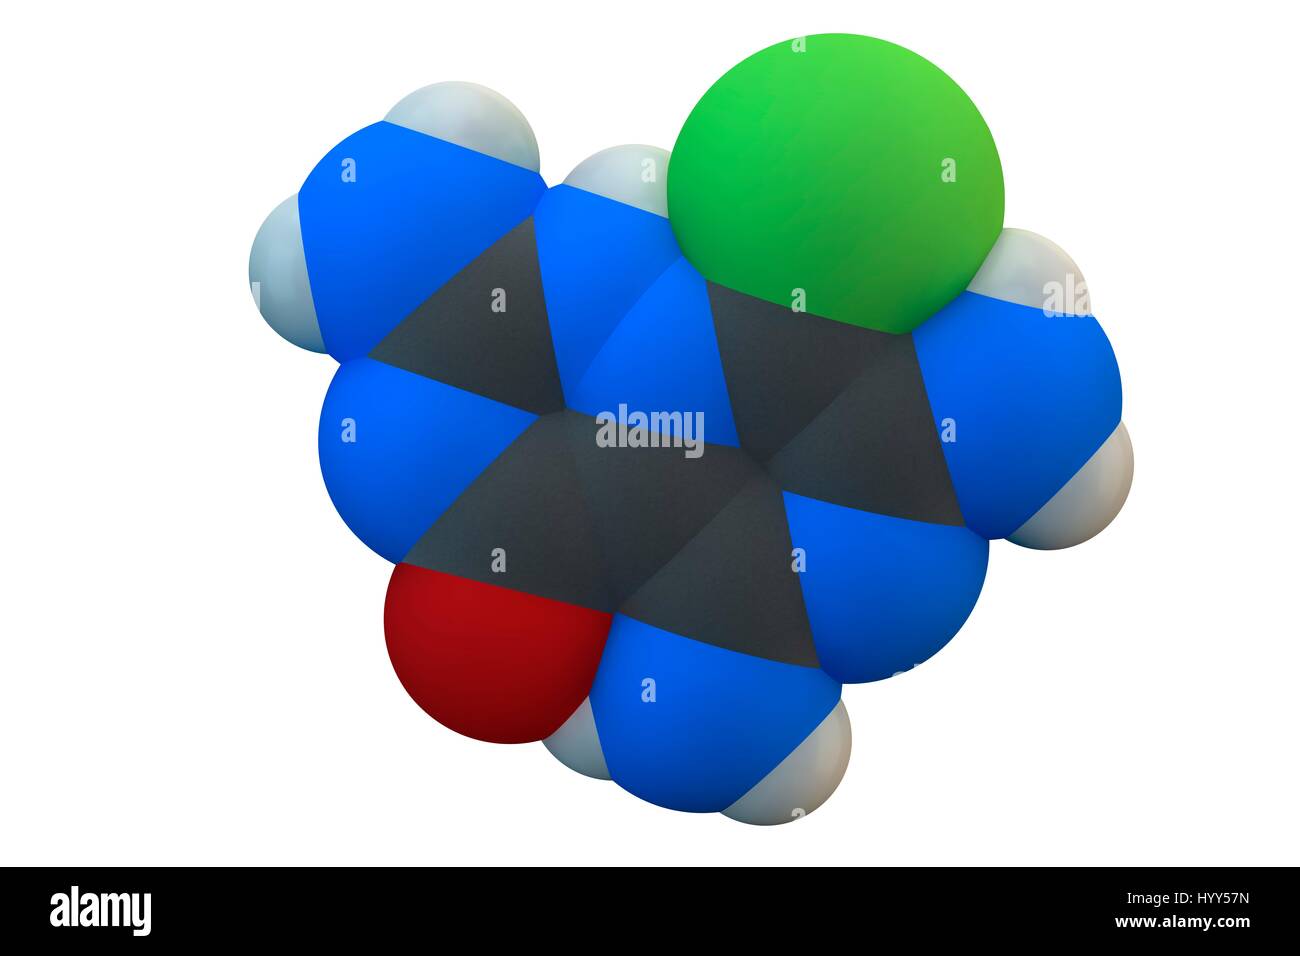 Amiloride diuretic drug molecule. Used in treatment of hypertension (high blood pressure) and congestive heart failure. Chemical formula is C6H8ClN7O. Atoms are represented as spheres: carbon (grey), hydrogen (white), chlorine (green), nitrogen (blue), oxygen (red). Illustration. Stock Photo